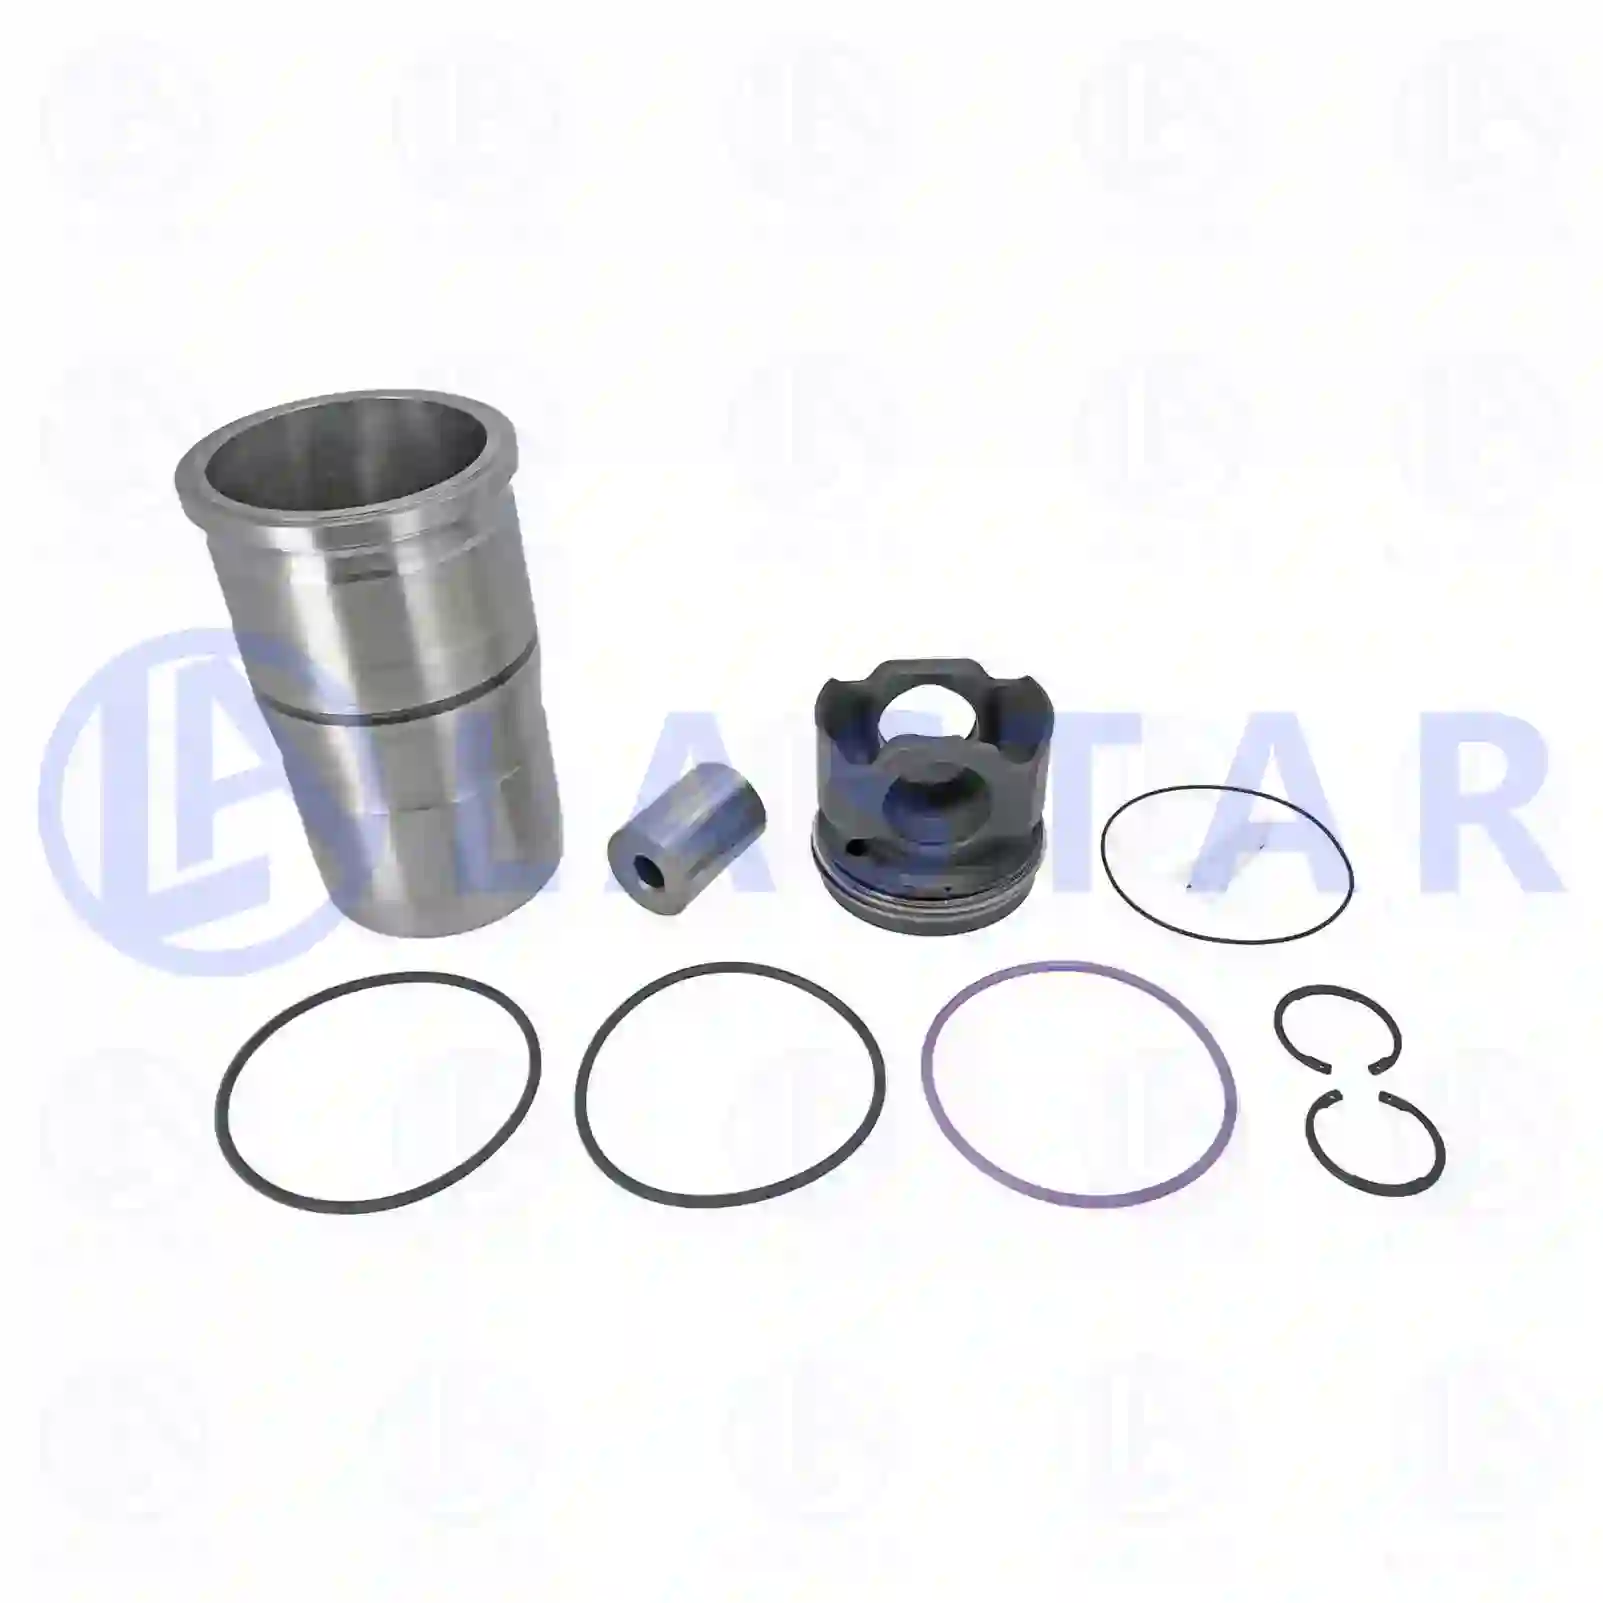 Piston with liner, 77701248, 20928630 ||  77701248 Lastar Spare Part | Truck Spare Parts, Auotomotive Spare Parts Piston with liner, 77701248, 20928630 ||  77701248 Lastar Spare Part | Truck Spare Parts, Auotomotive Spare Parts